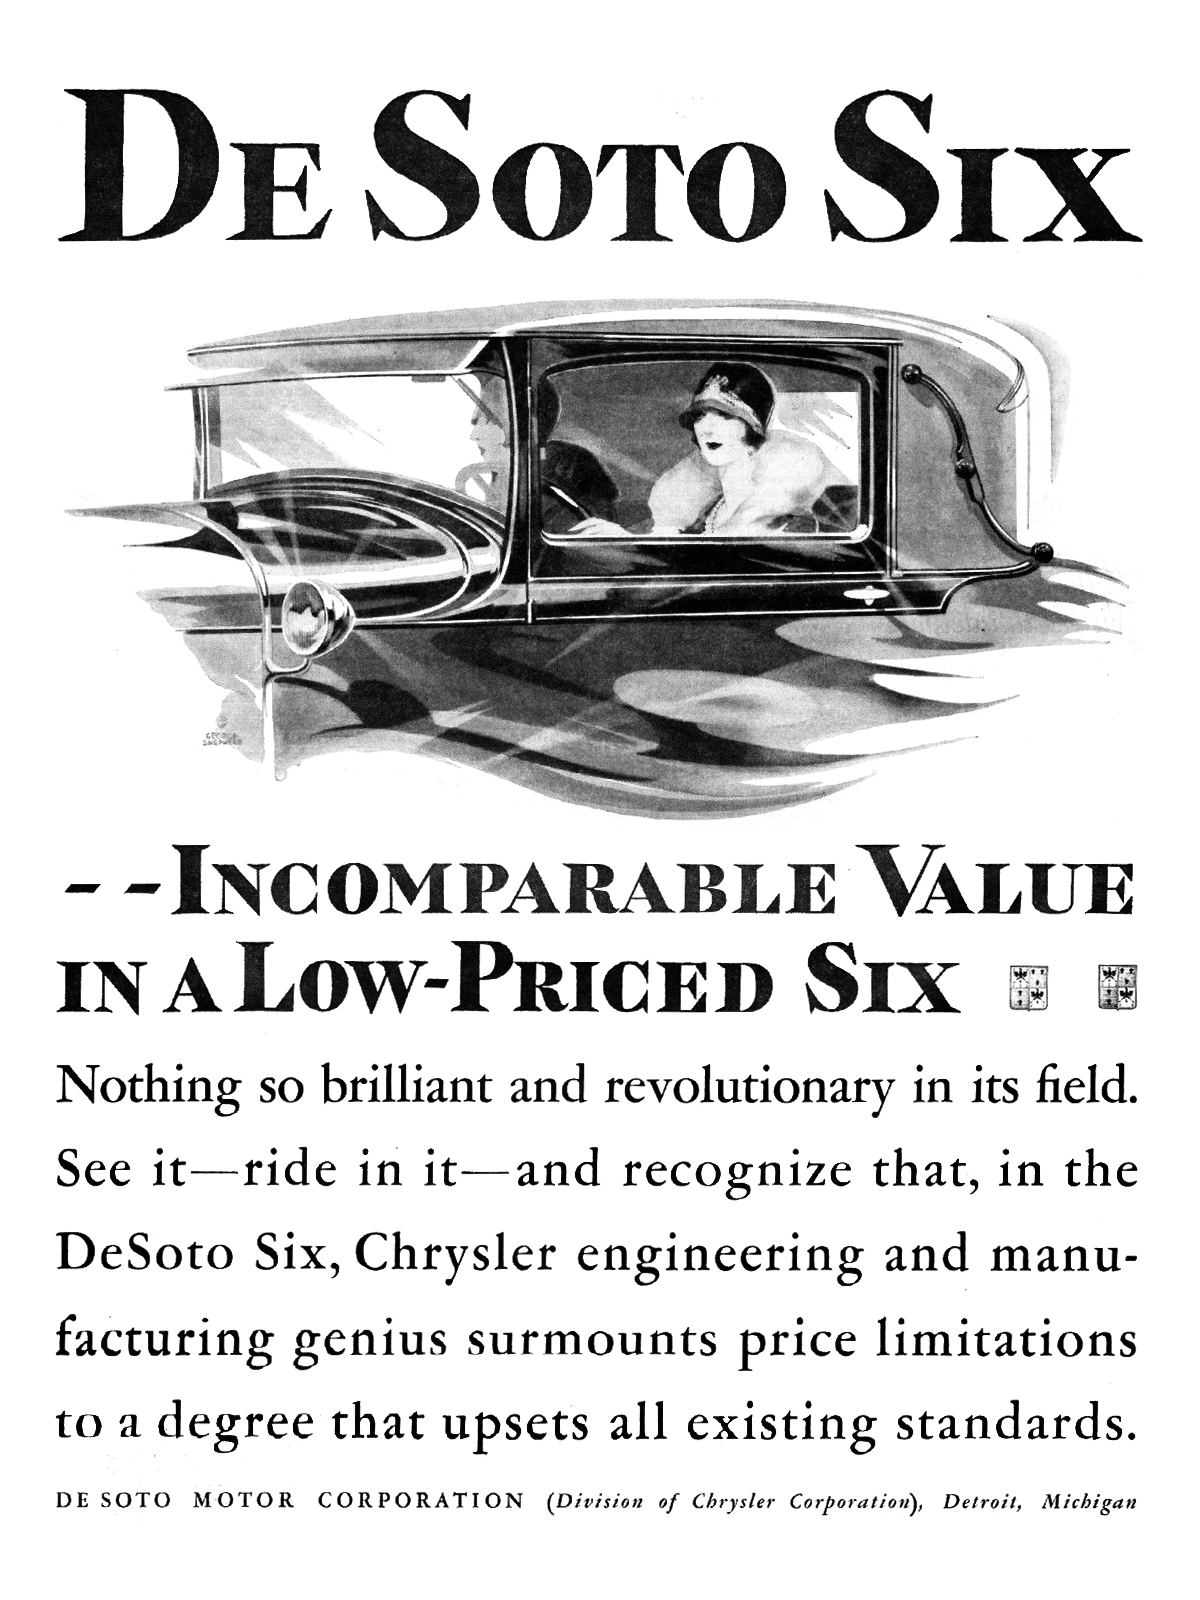 DeSoto Six Ad (September, 1928): Incomparable Value in a Low-Priced Six - Illustrated by George Shepherd